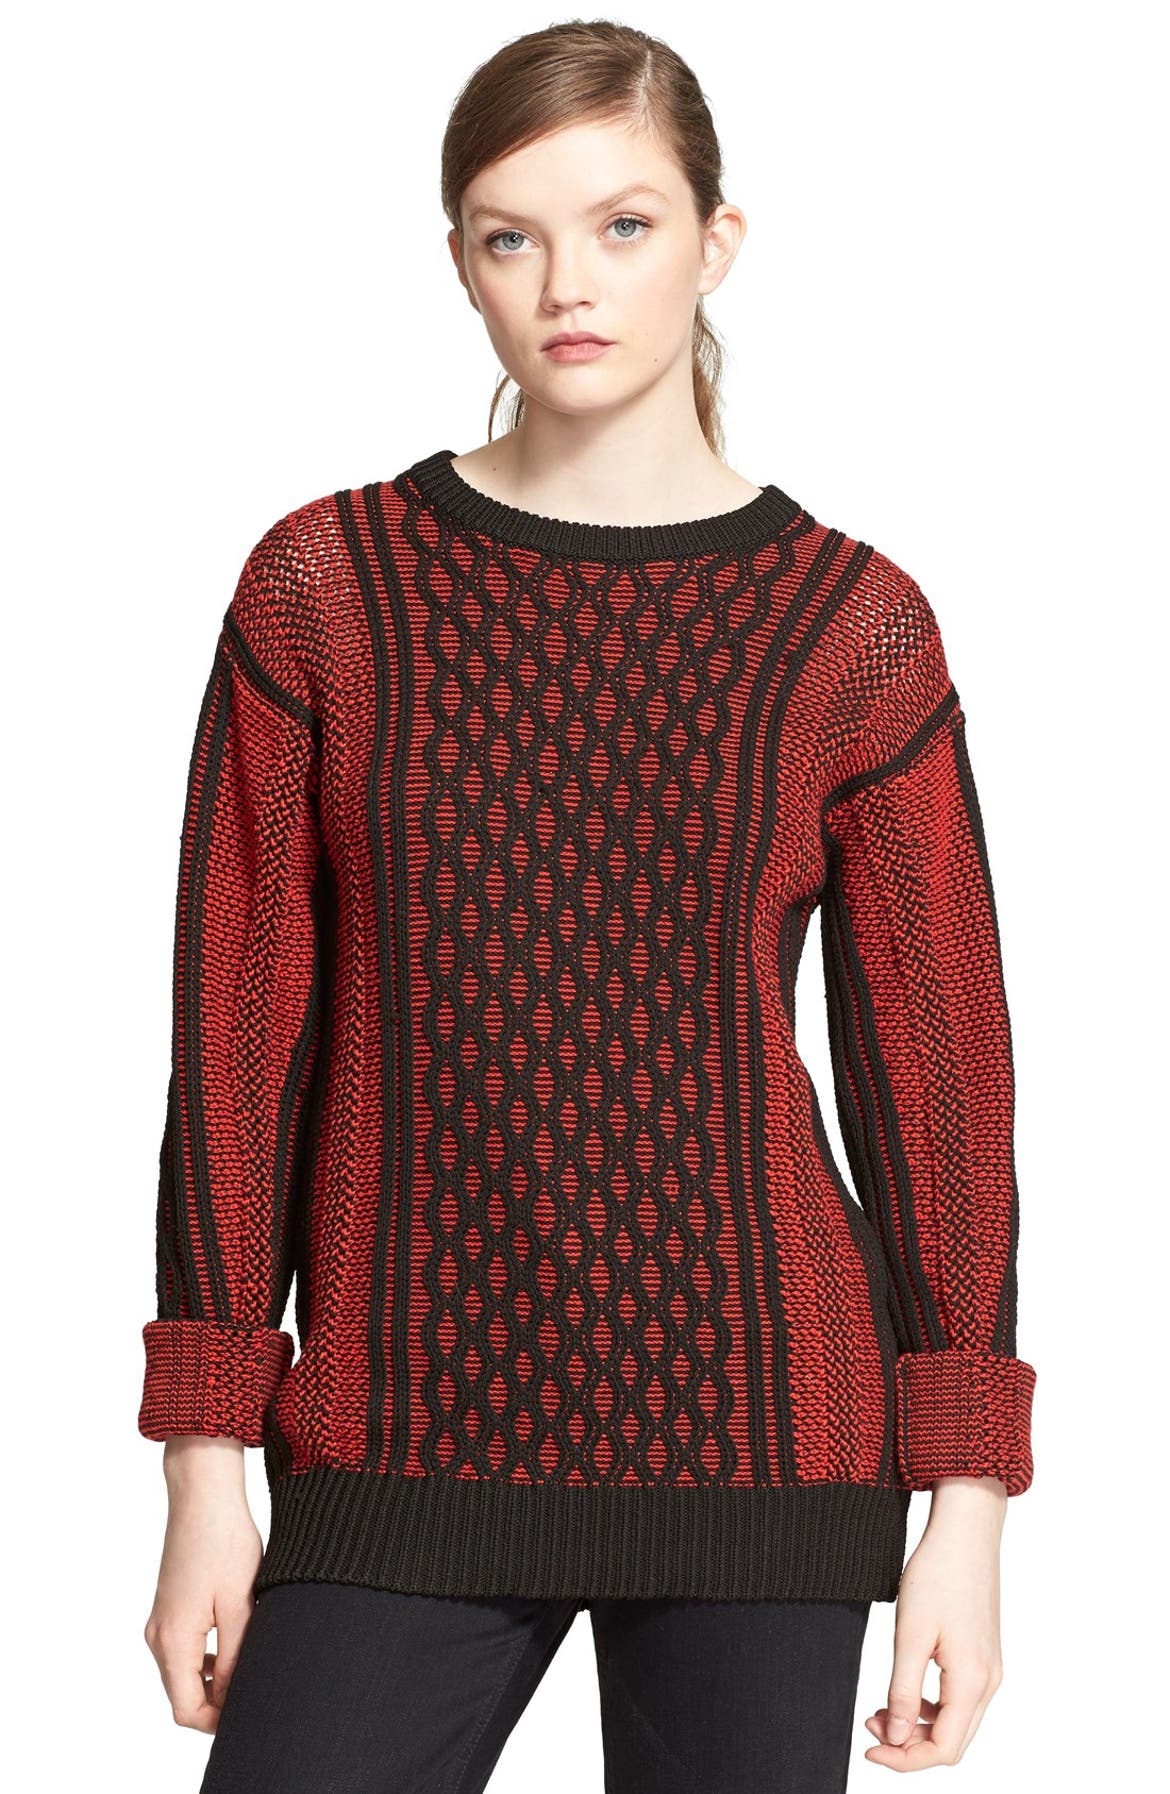 T by Alexander Wang Honeycomb Knit Sweater | Nordstrom